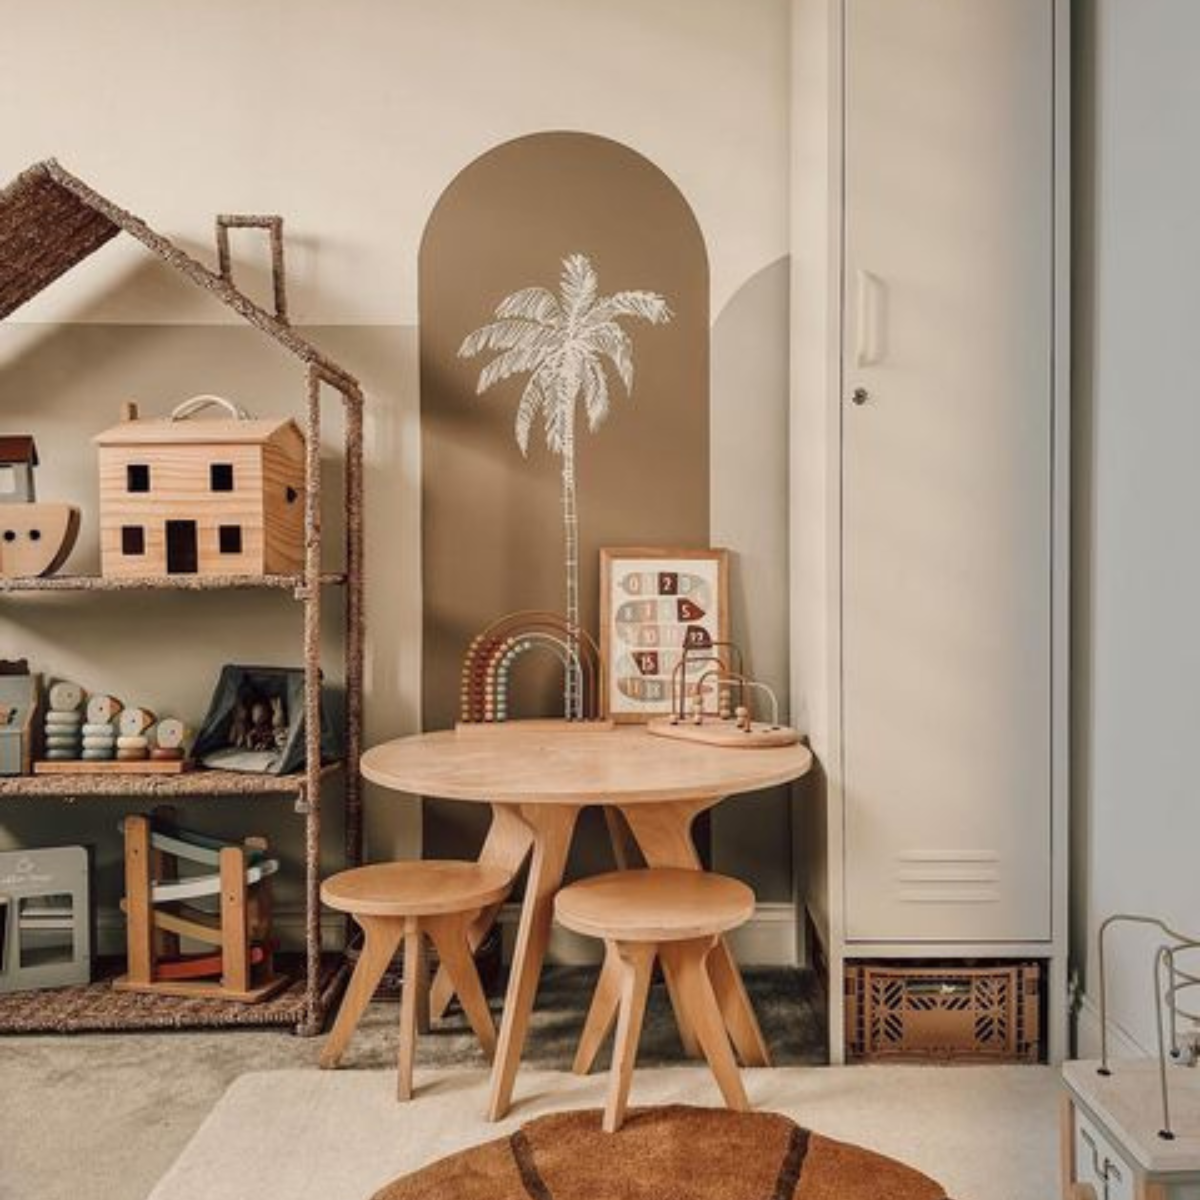 A White Skinny sits in the corner of a neutral-toned room with accents in shades of brown. There is a taupe arch painted on the wall with a white palm tree sketch, and a wooden table and chairs arranged around some toys.